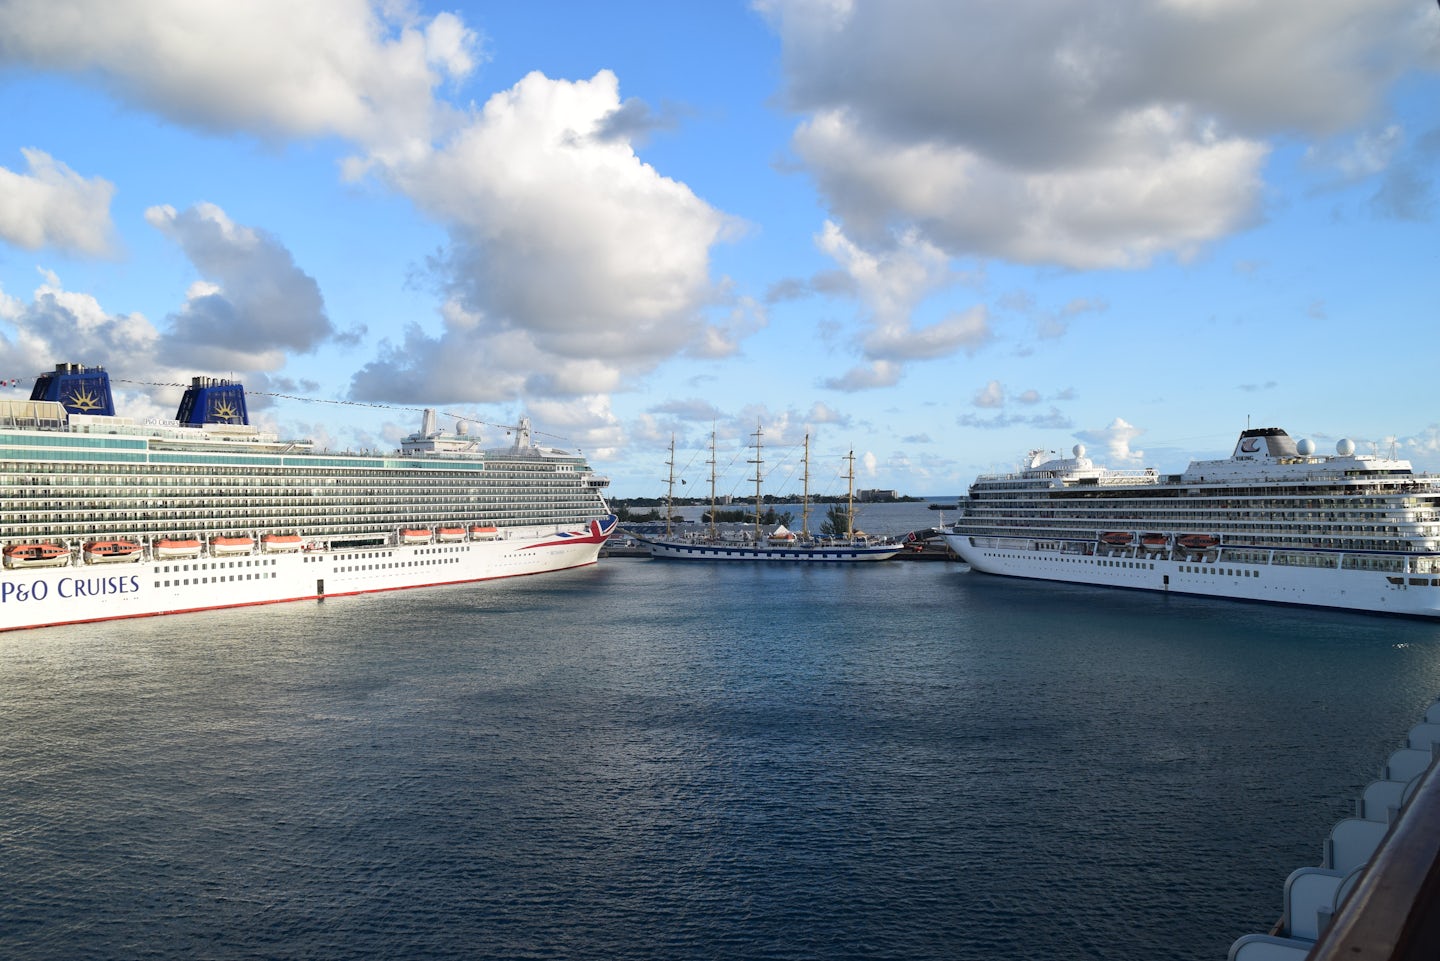 3 of the 5 ships that were in port at the same time.